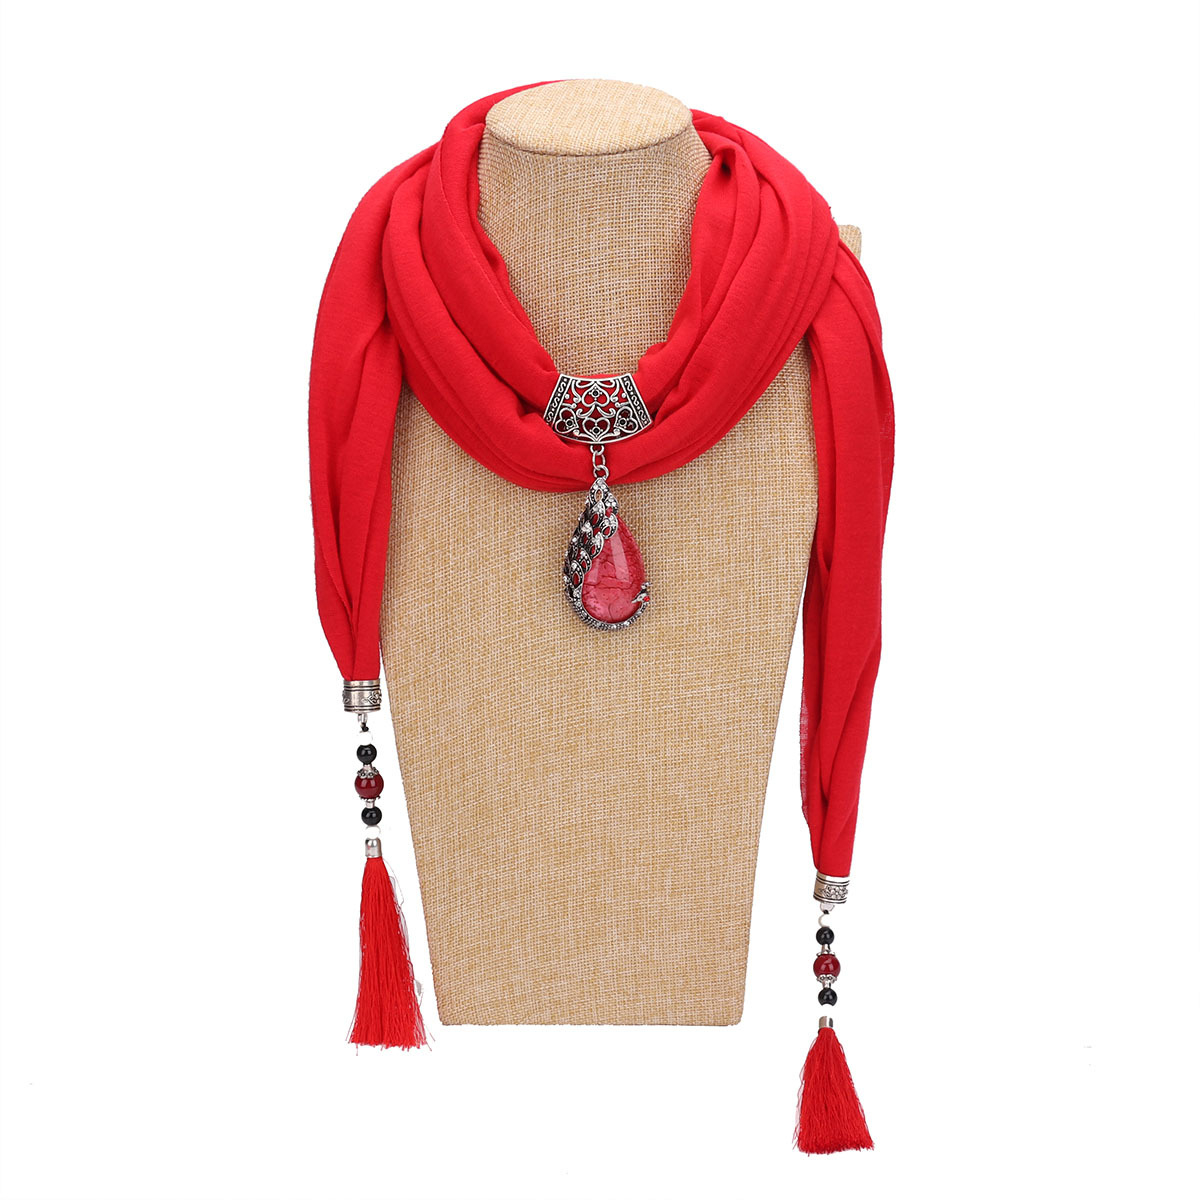  1822 women's classic style necklace sash scarf with jewelry pendant 